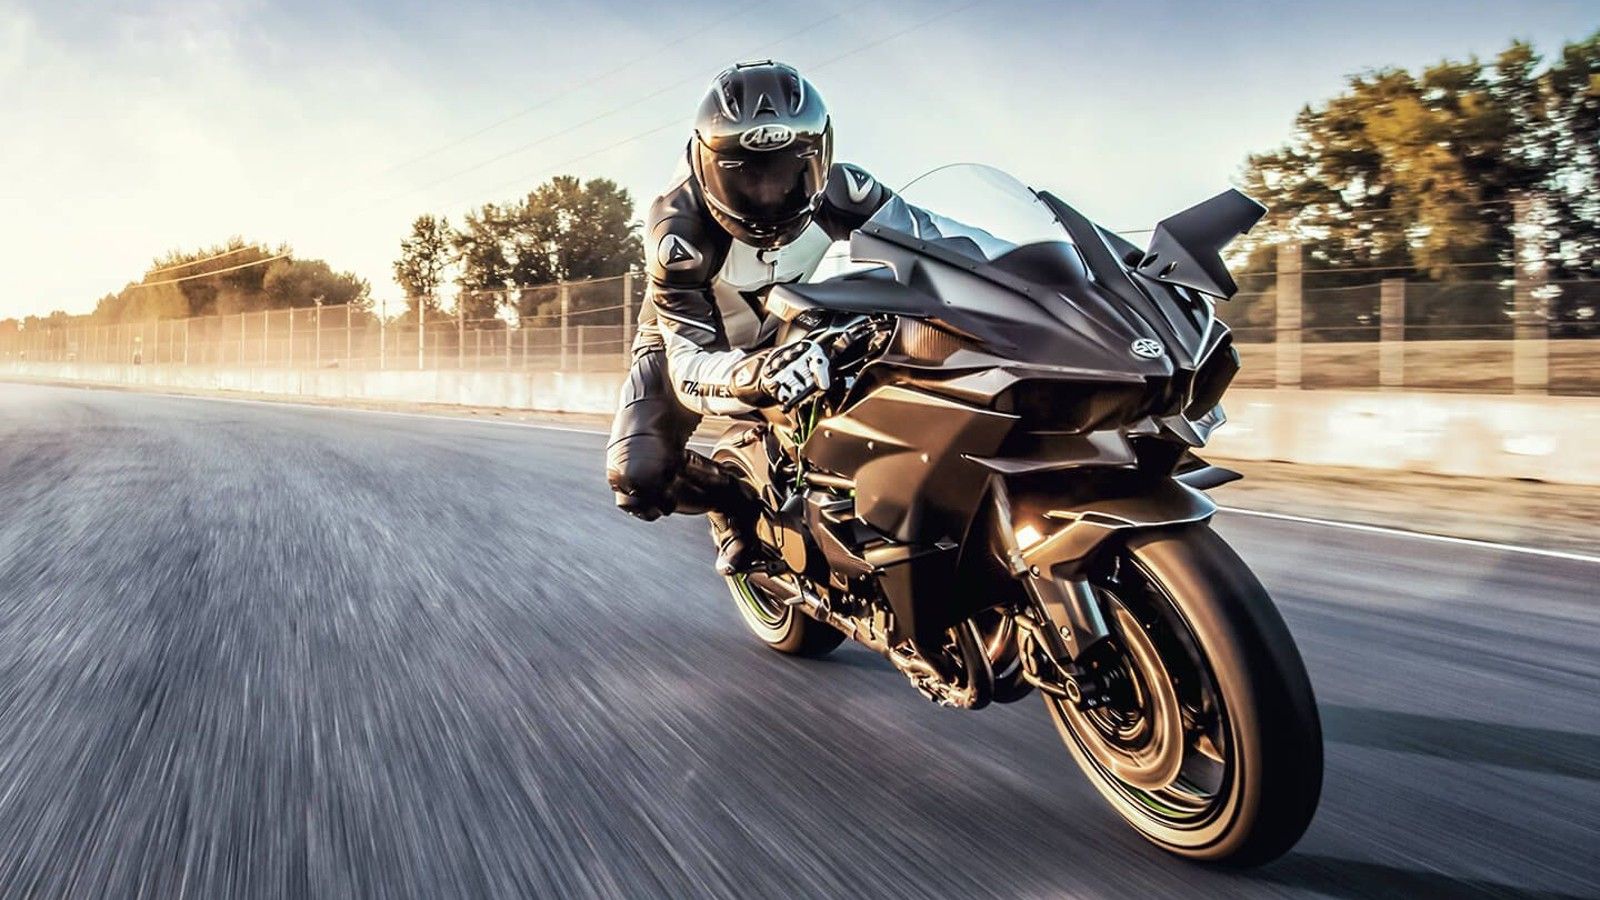 13 Reasons Why The Kawasaki Ninja H2R Is The Craziest Motrocycle In the  World